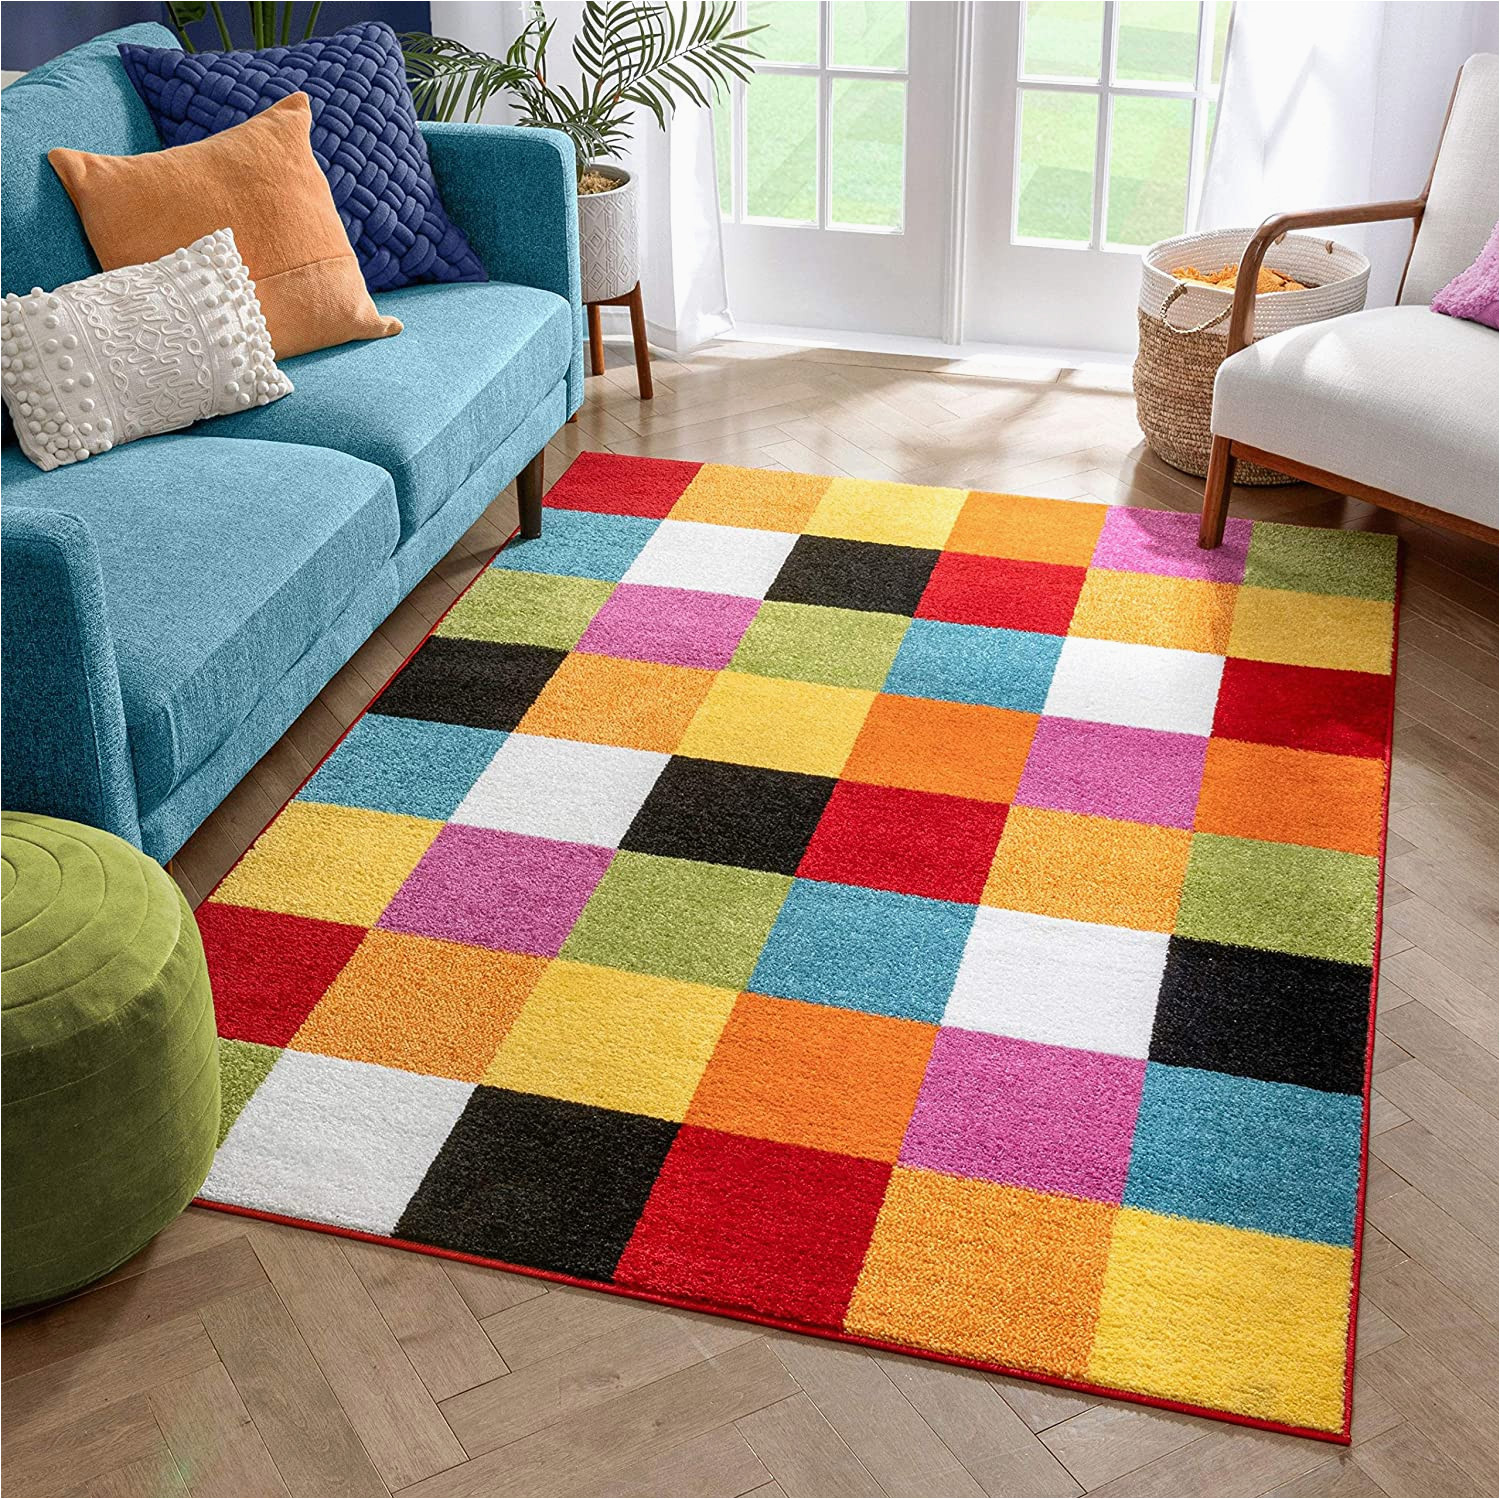 Area Rugs for Preschool Classrooms 30 Classroom Rugs You Can Buy On Amazon that Looks Really Good …